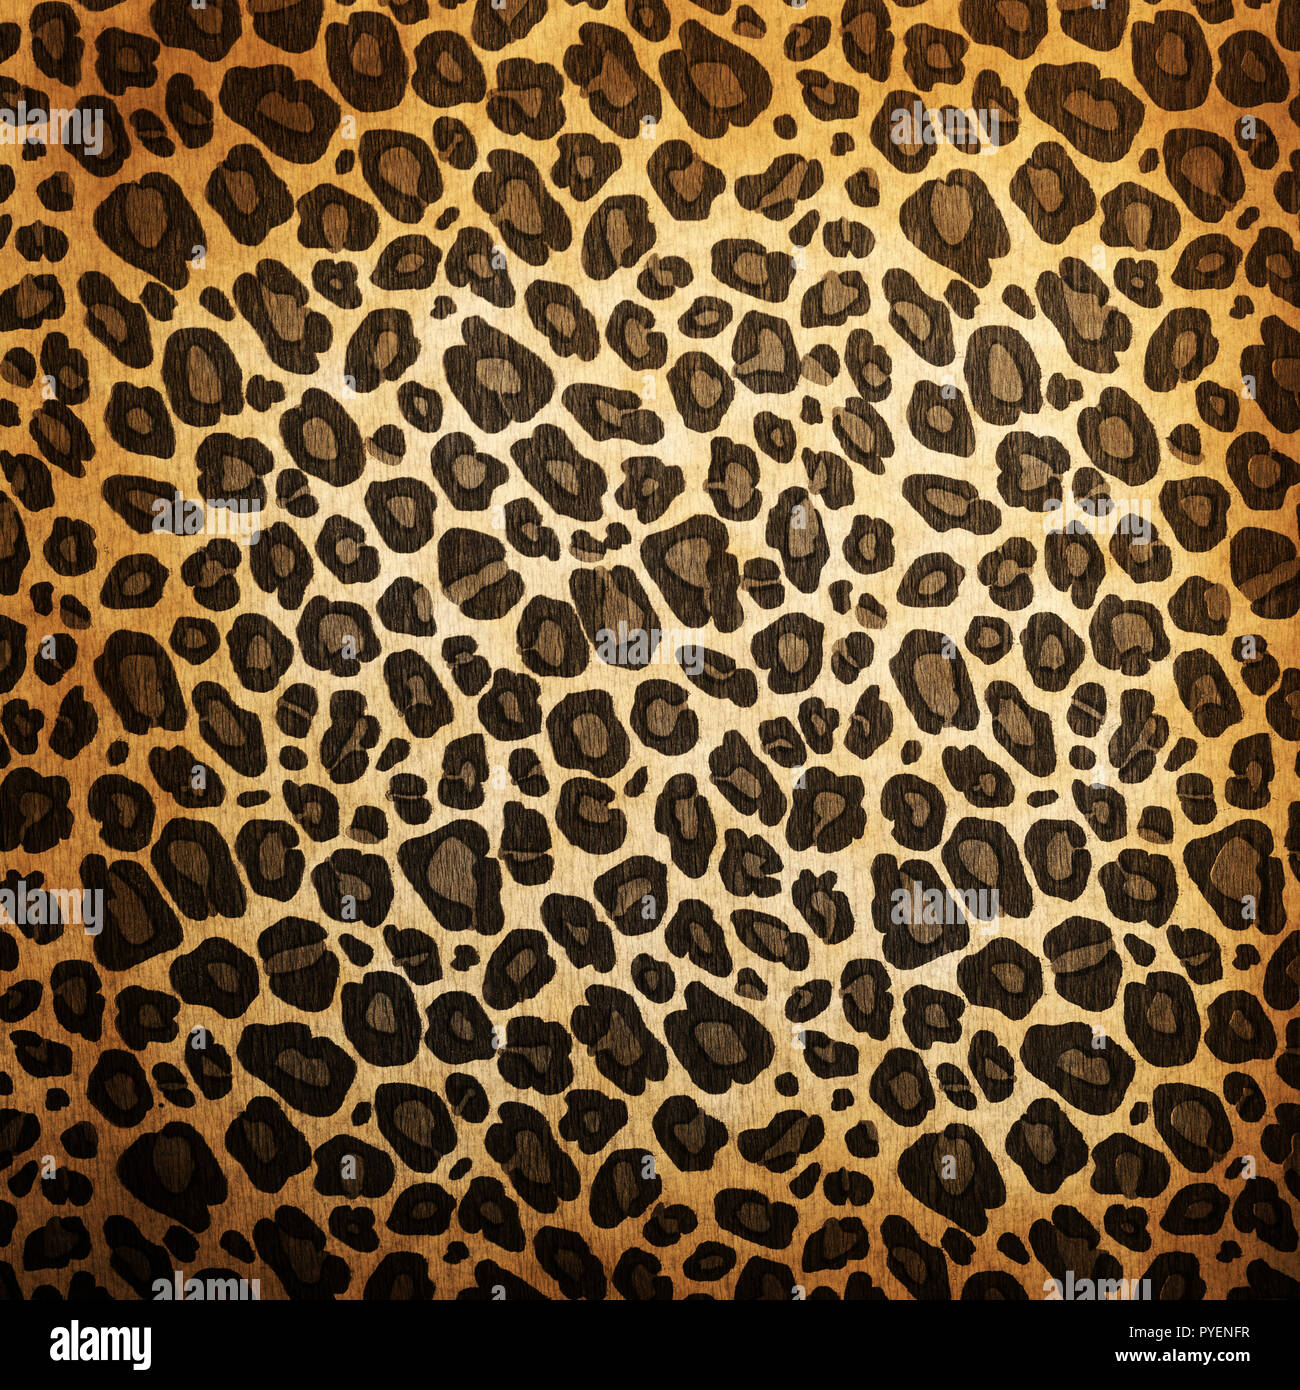 Leopard pattern background or texture close up Stock Photo - Alamy